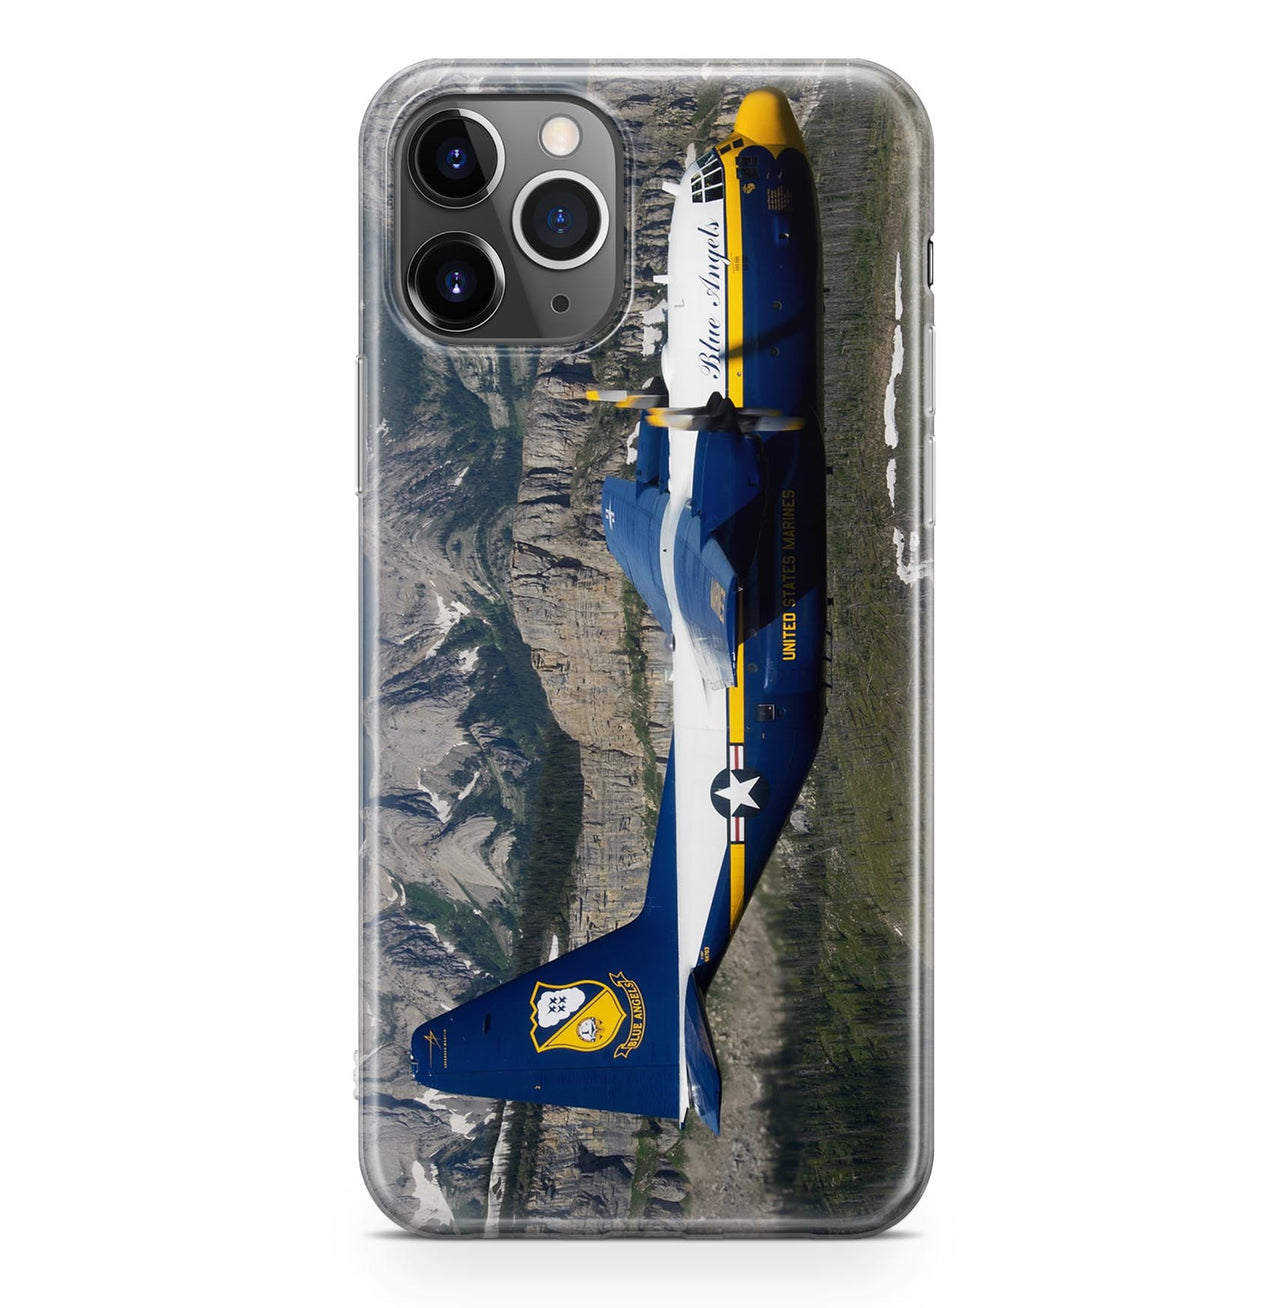 Amazing View with Blue Angels Aircraft Designed iPhone Cases